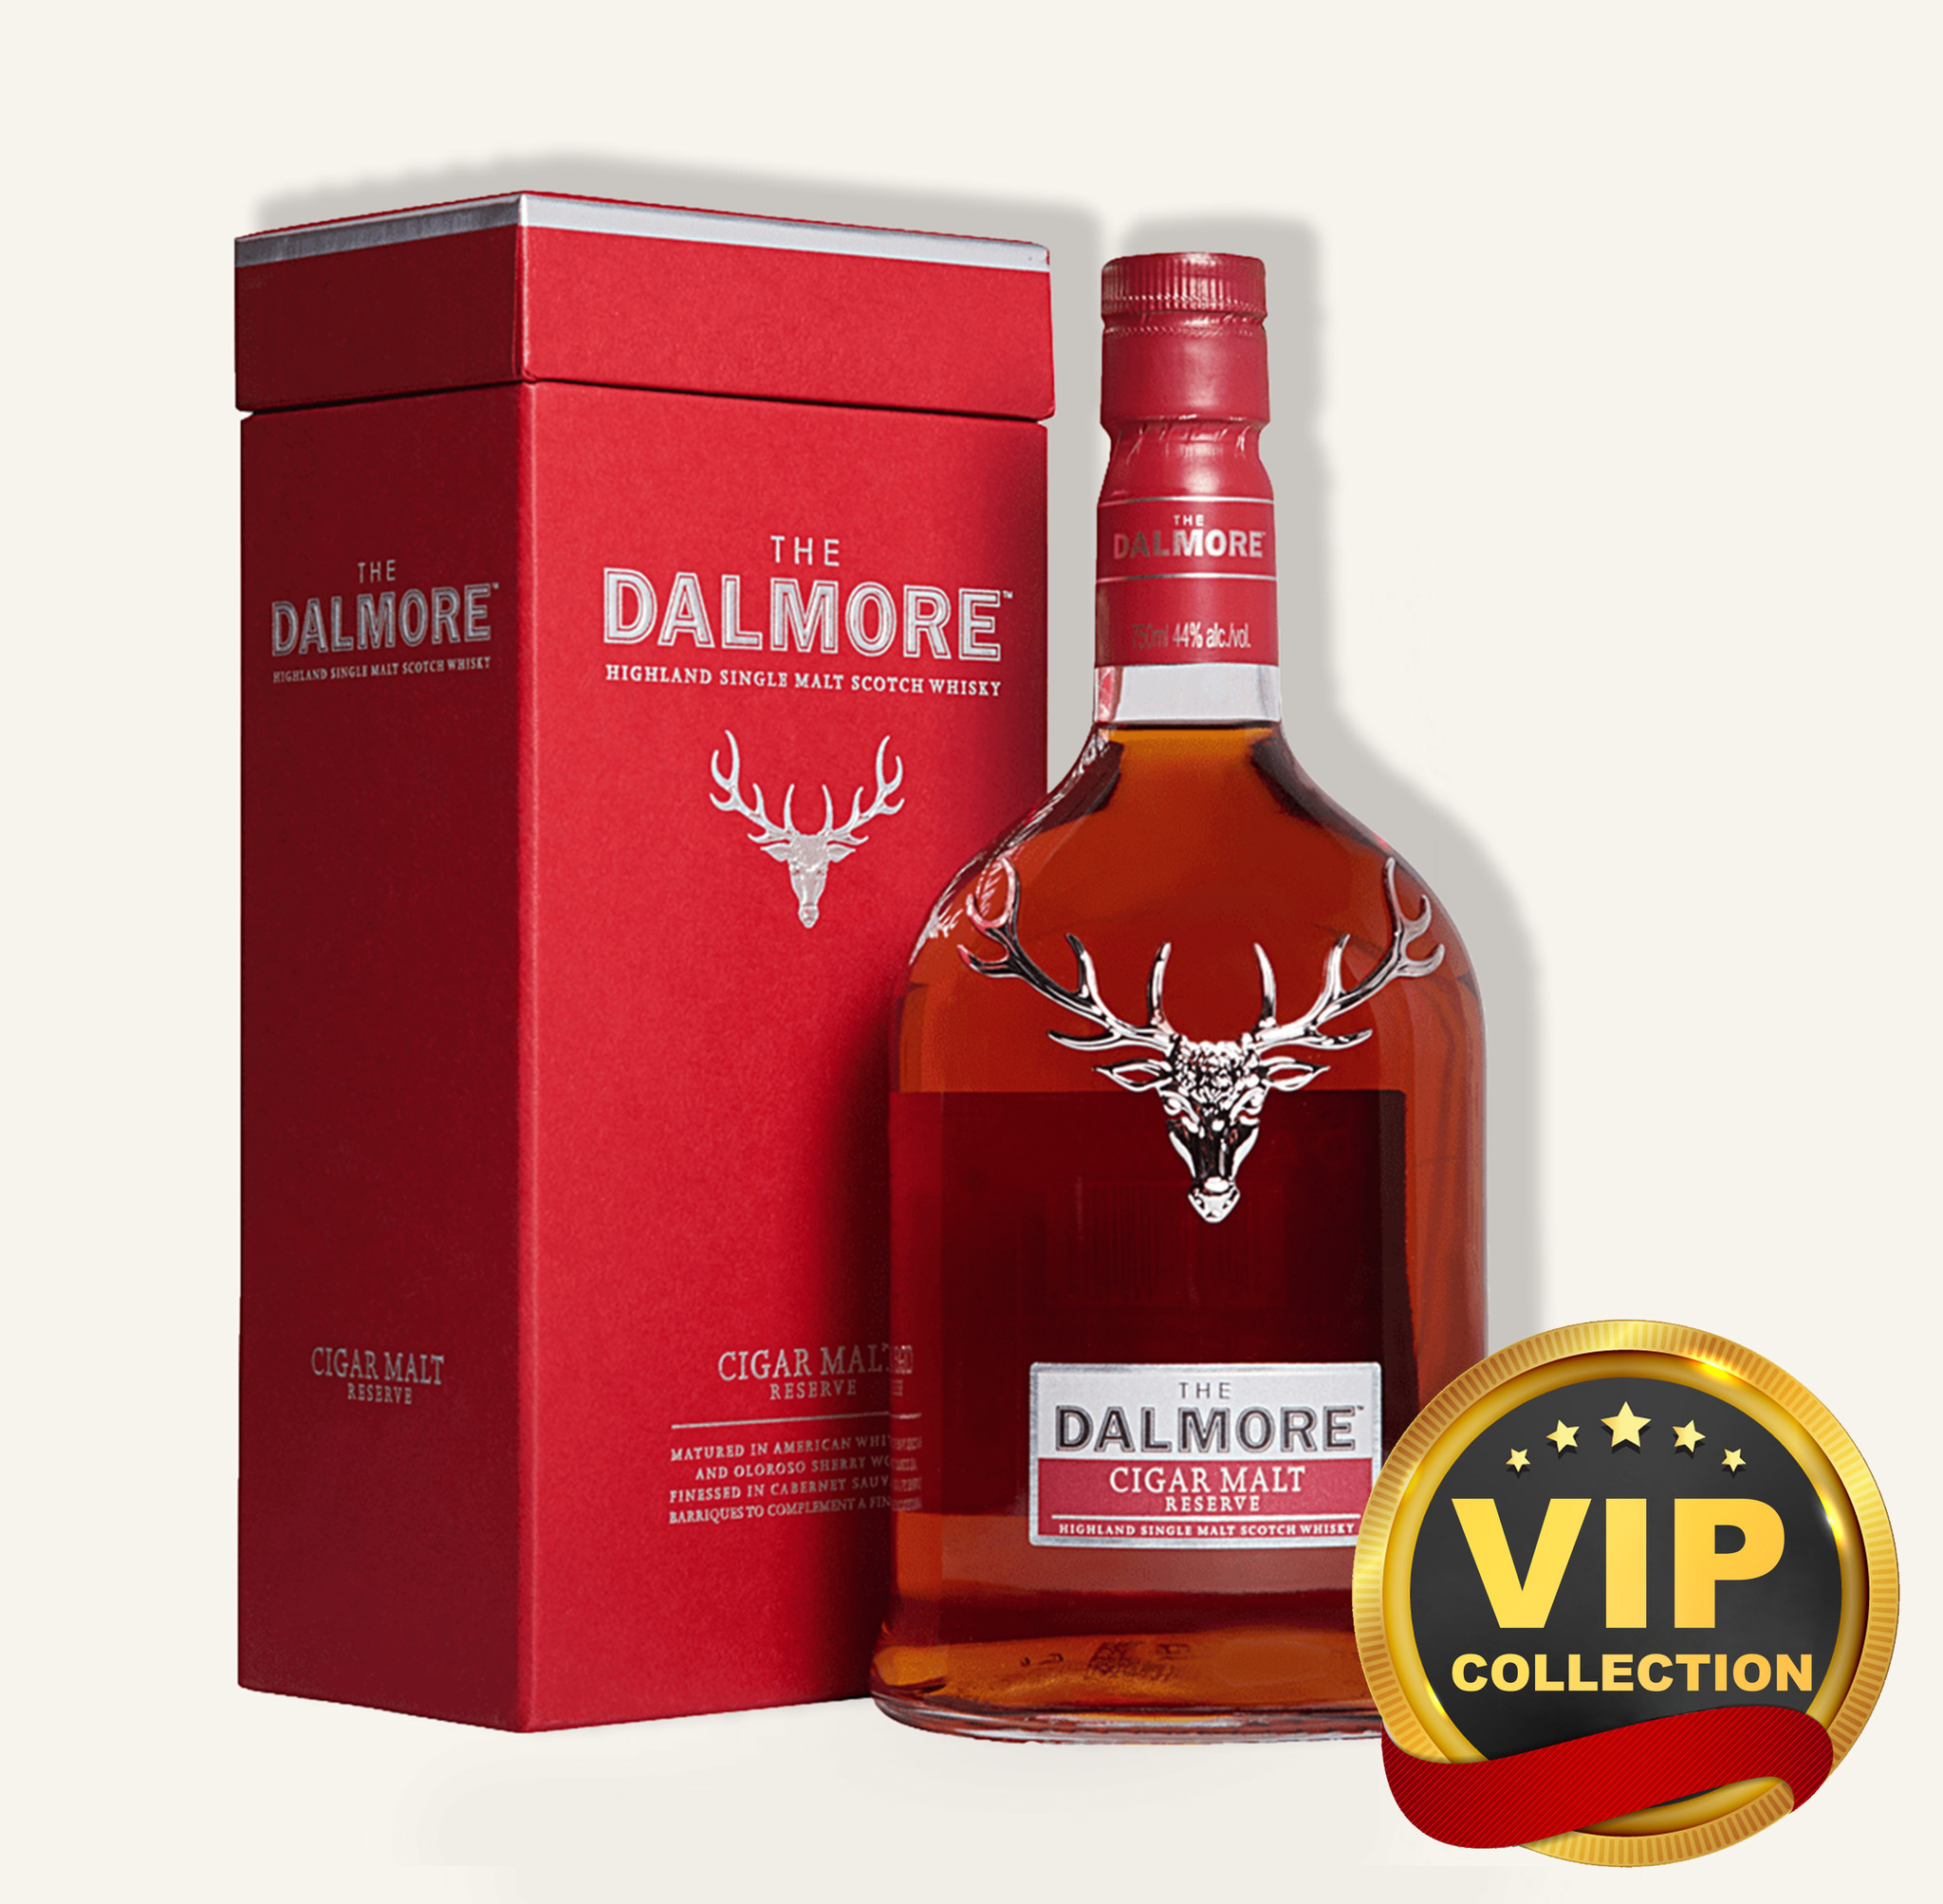 What the Dalmore's $1 Million Scotch Collection Actually Tastes Like